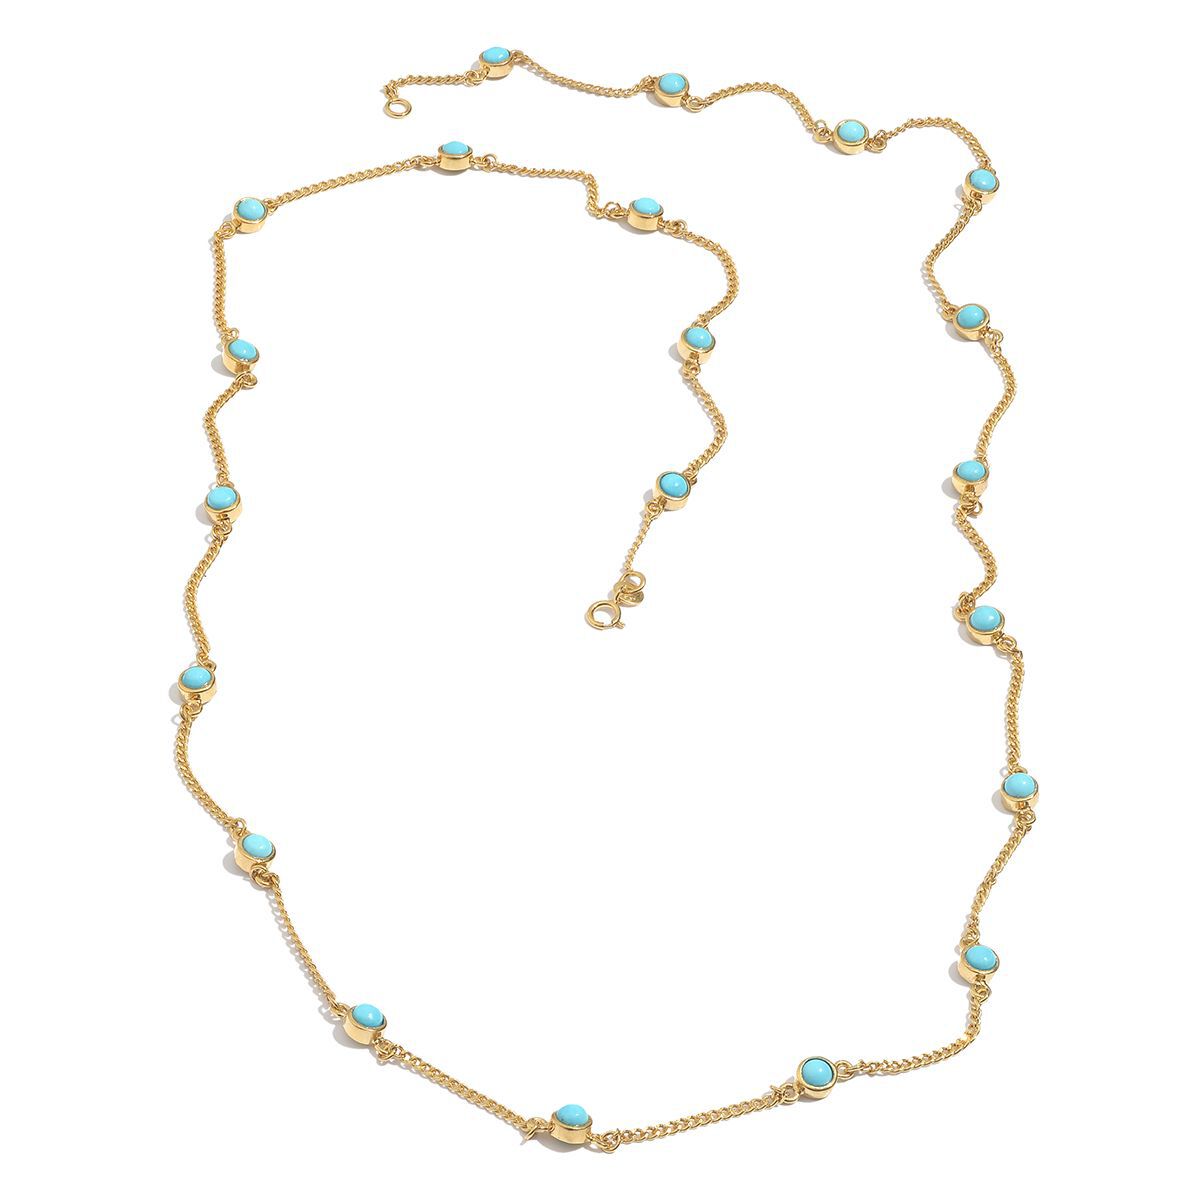 Italian 4mm Turquoise Bead Station Necklace in 14kt Yellow Gold |  Ross-Simons | Station necklace, Stylish necklace, Turquoise beads